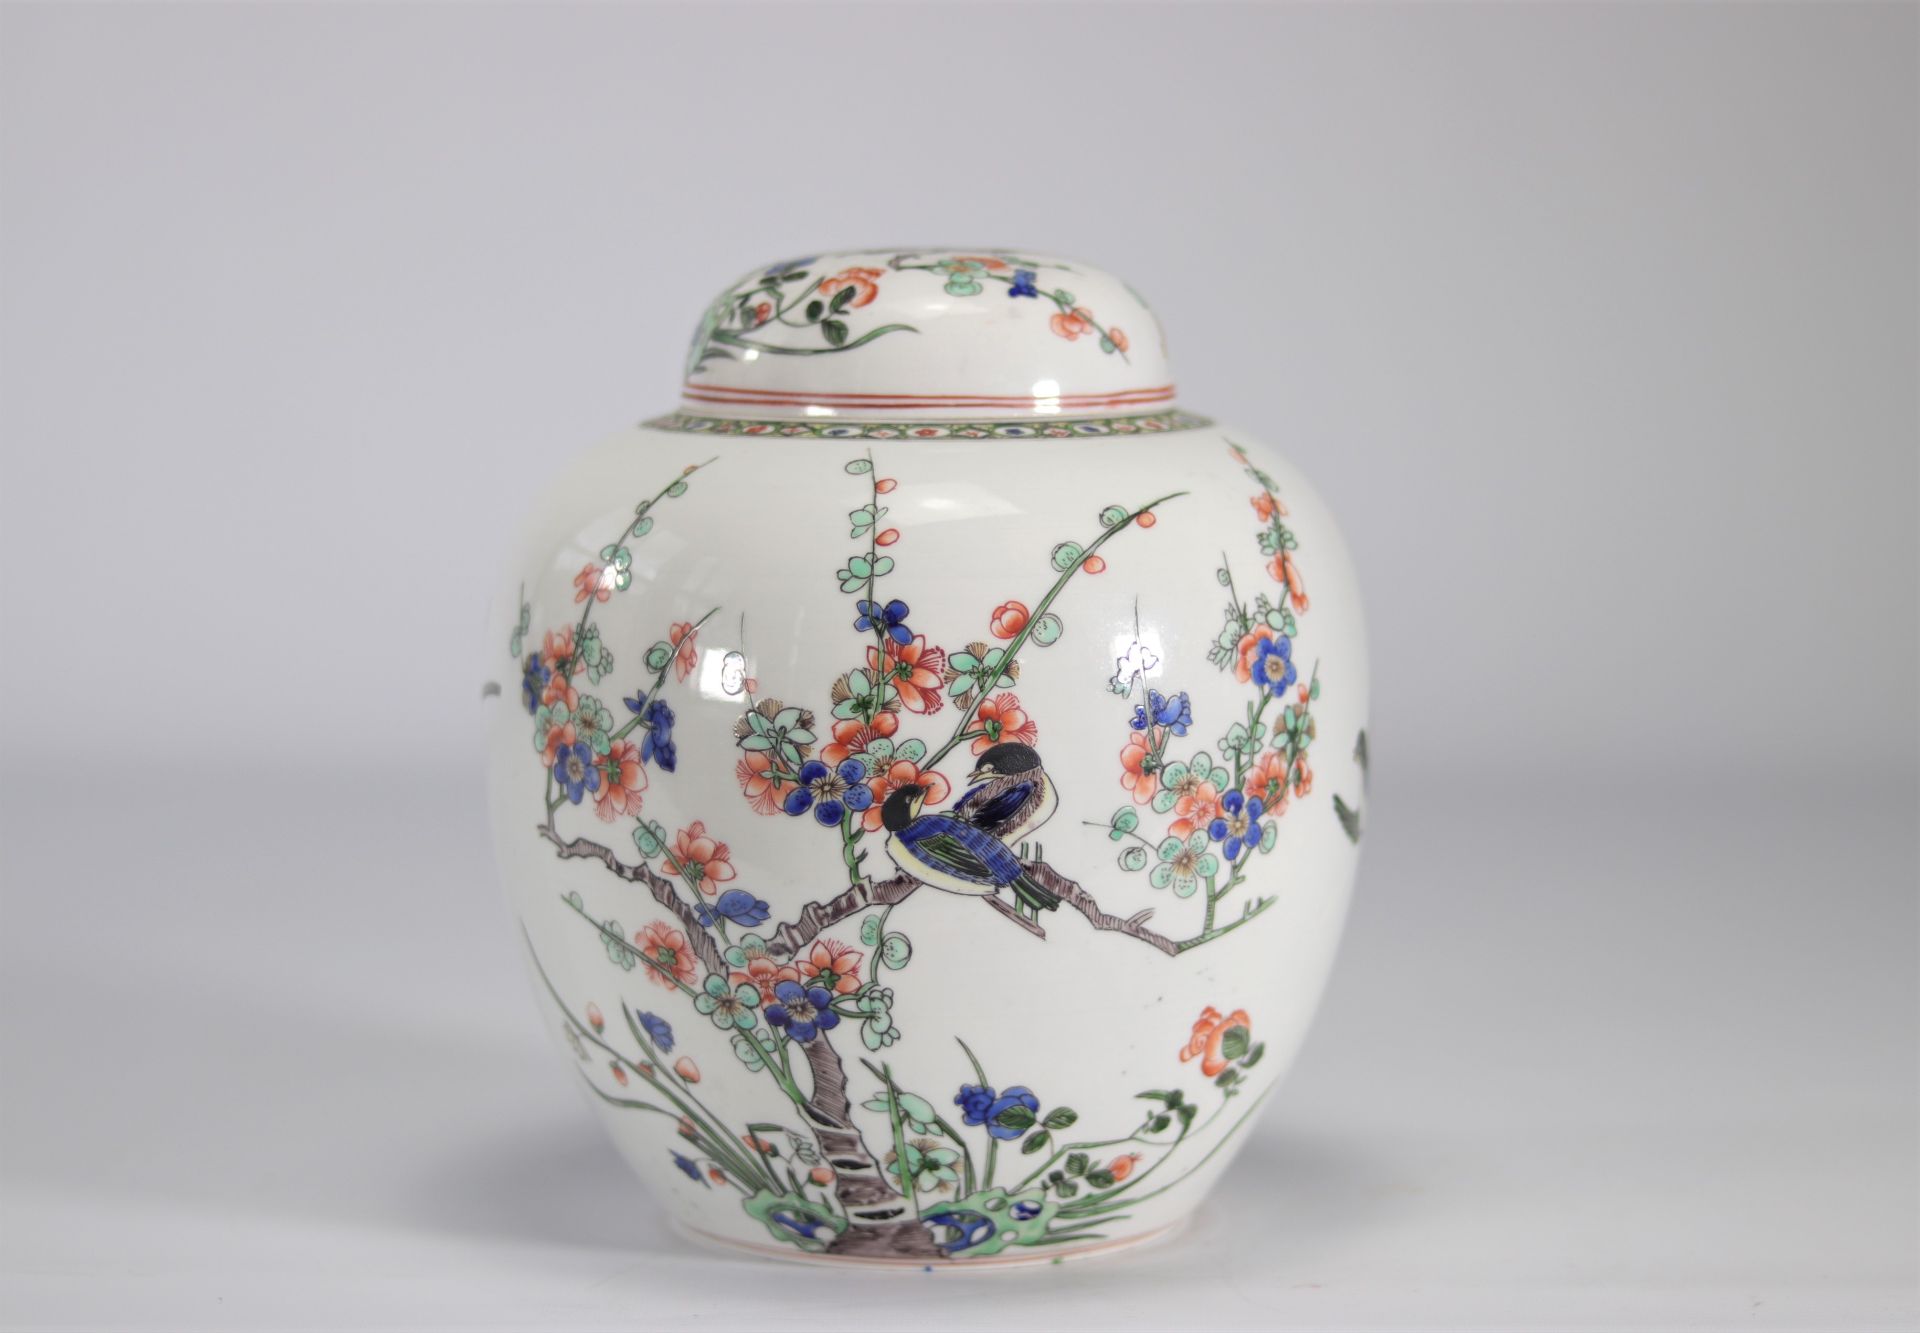 Covered vase in Chinese porcelain of the famille verte decorated with birds